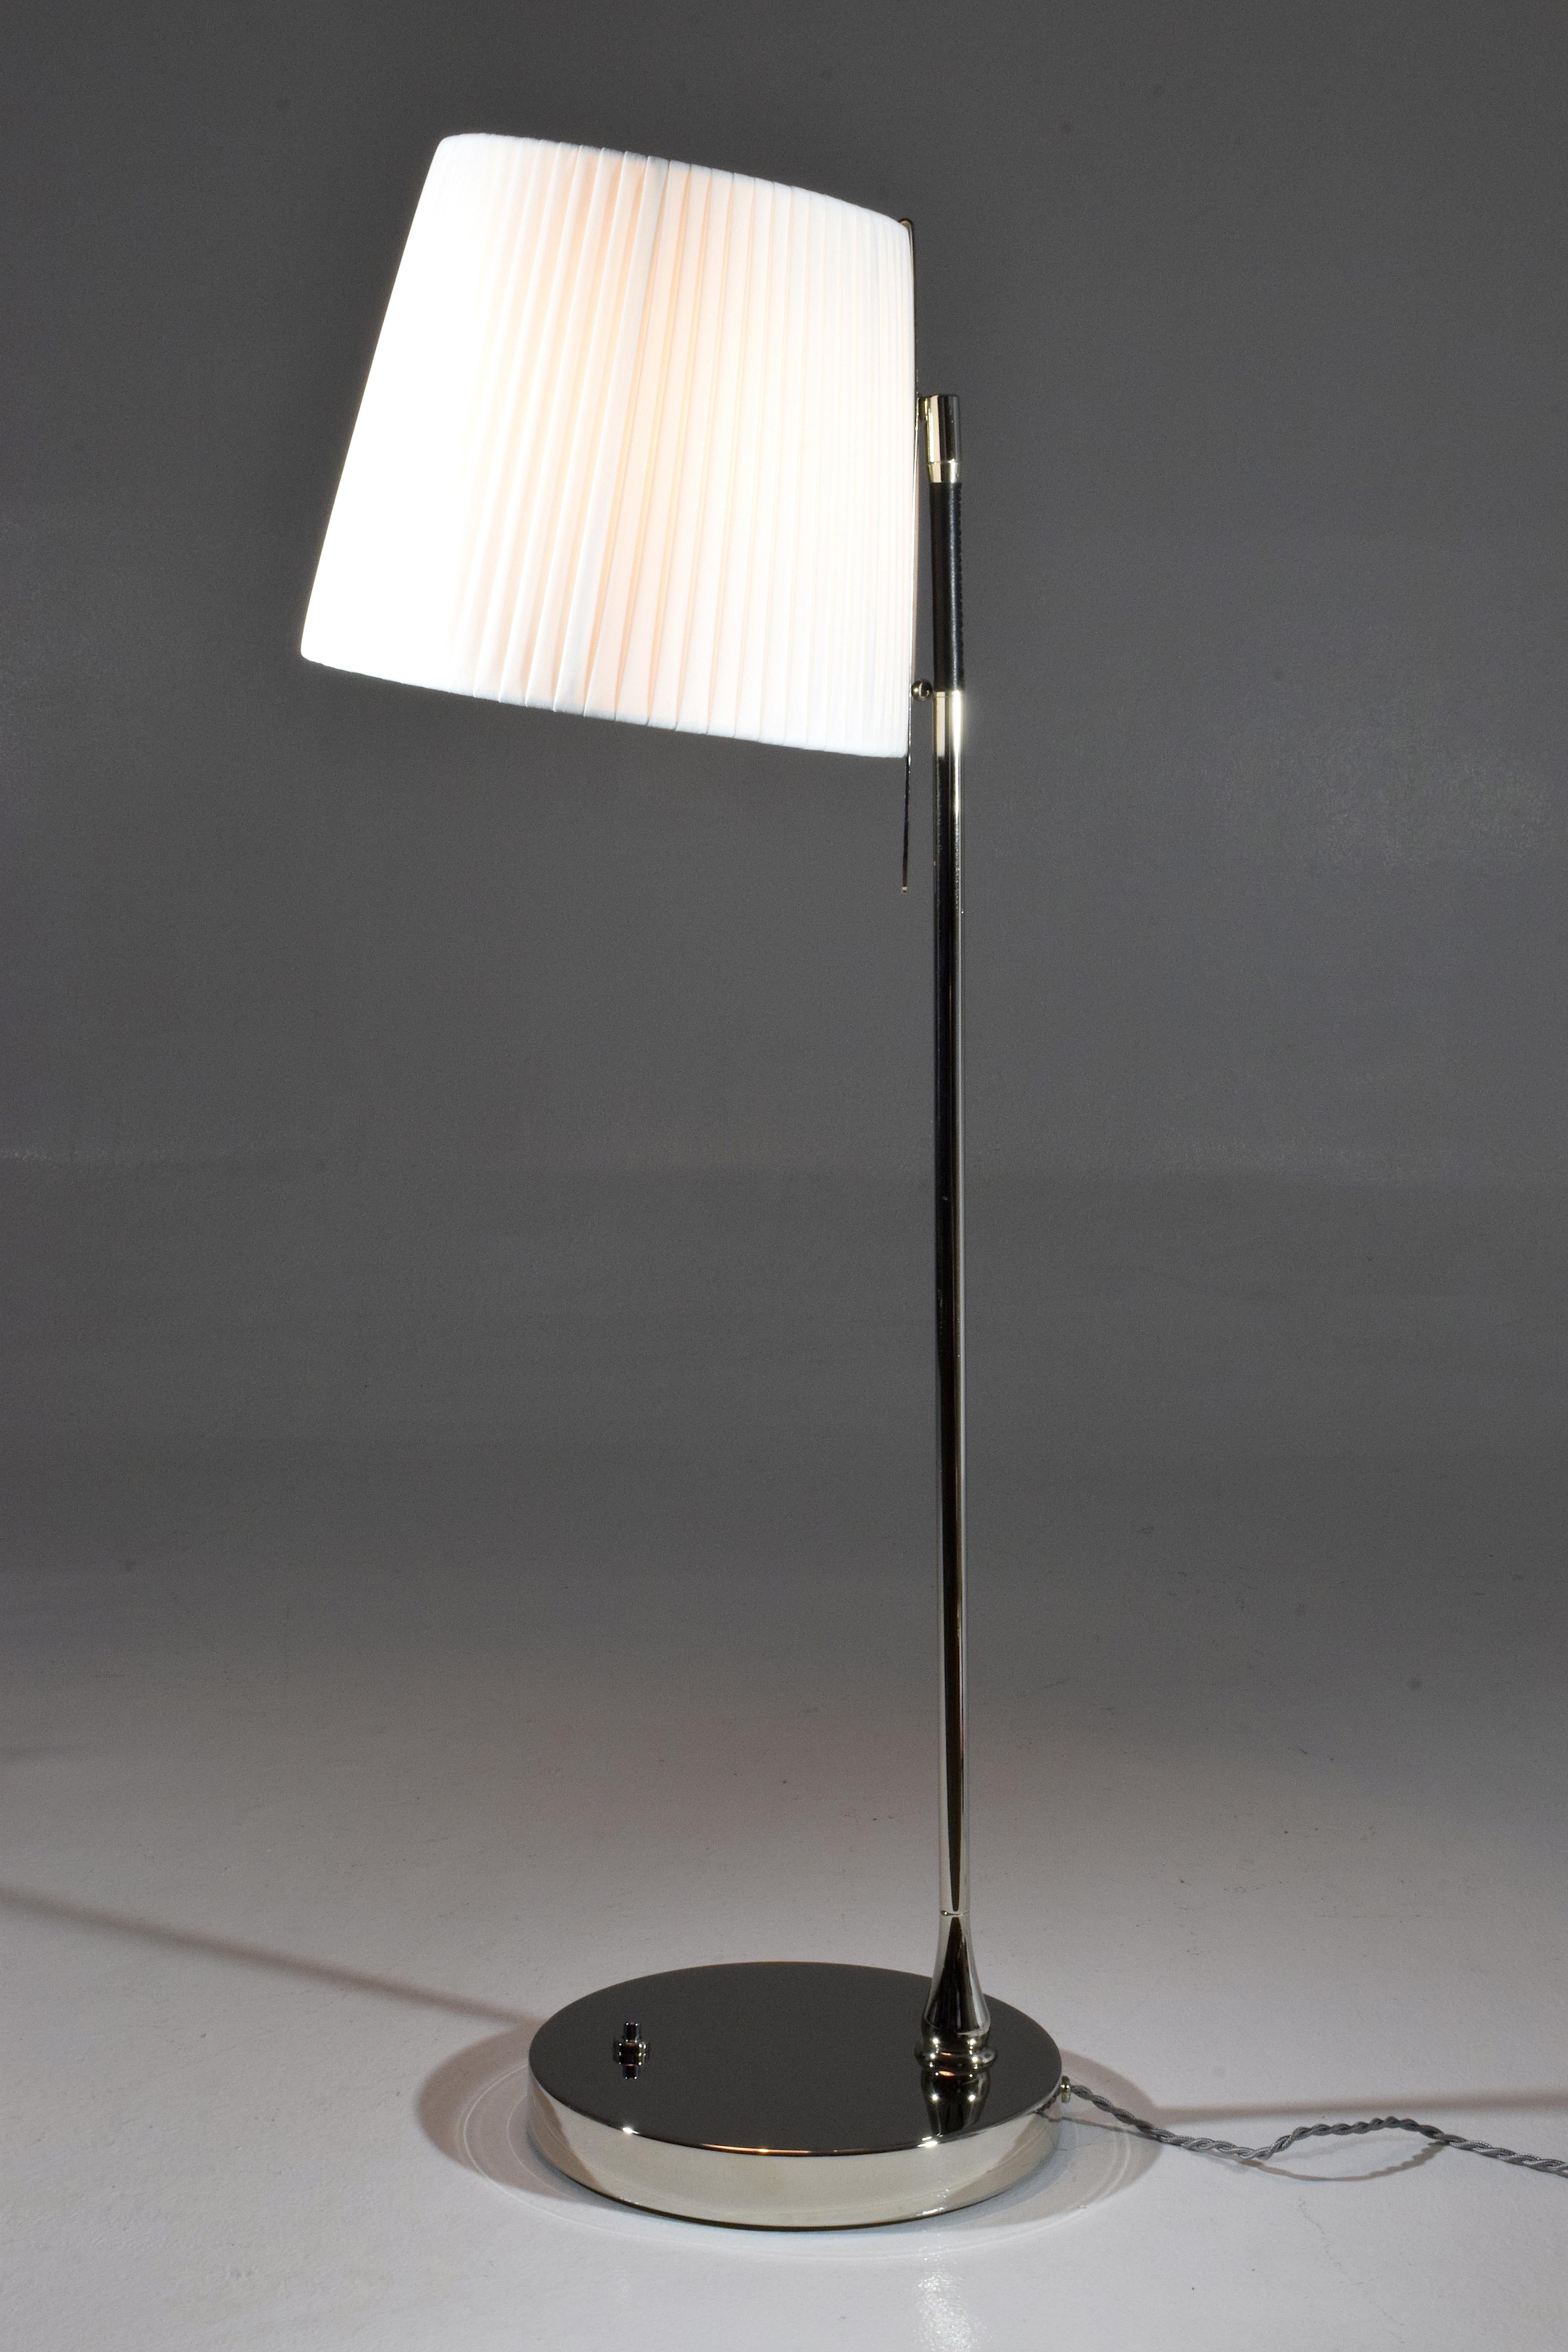 Contemporary handcrafted tall table lamp composed of a nickel-plated solid brass structure and adorned with a black hand-sewn sheathed leather detail. The fabric shade rotates at 90 degrees and is designed with a stem so you may orientate the light